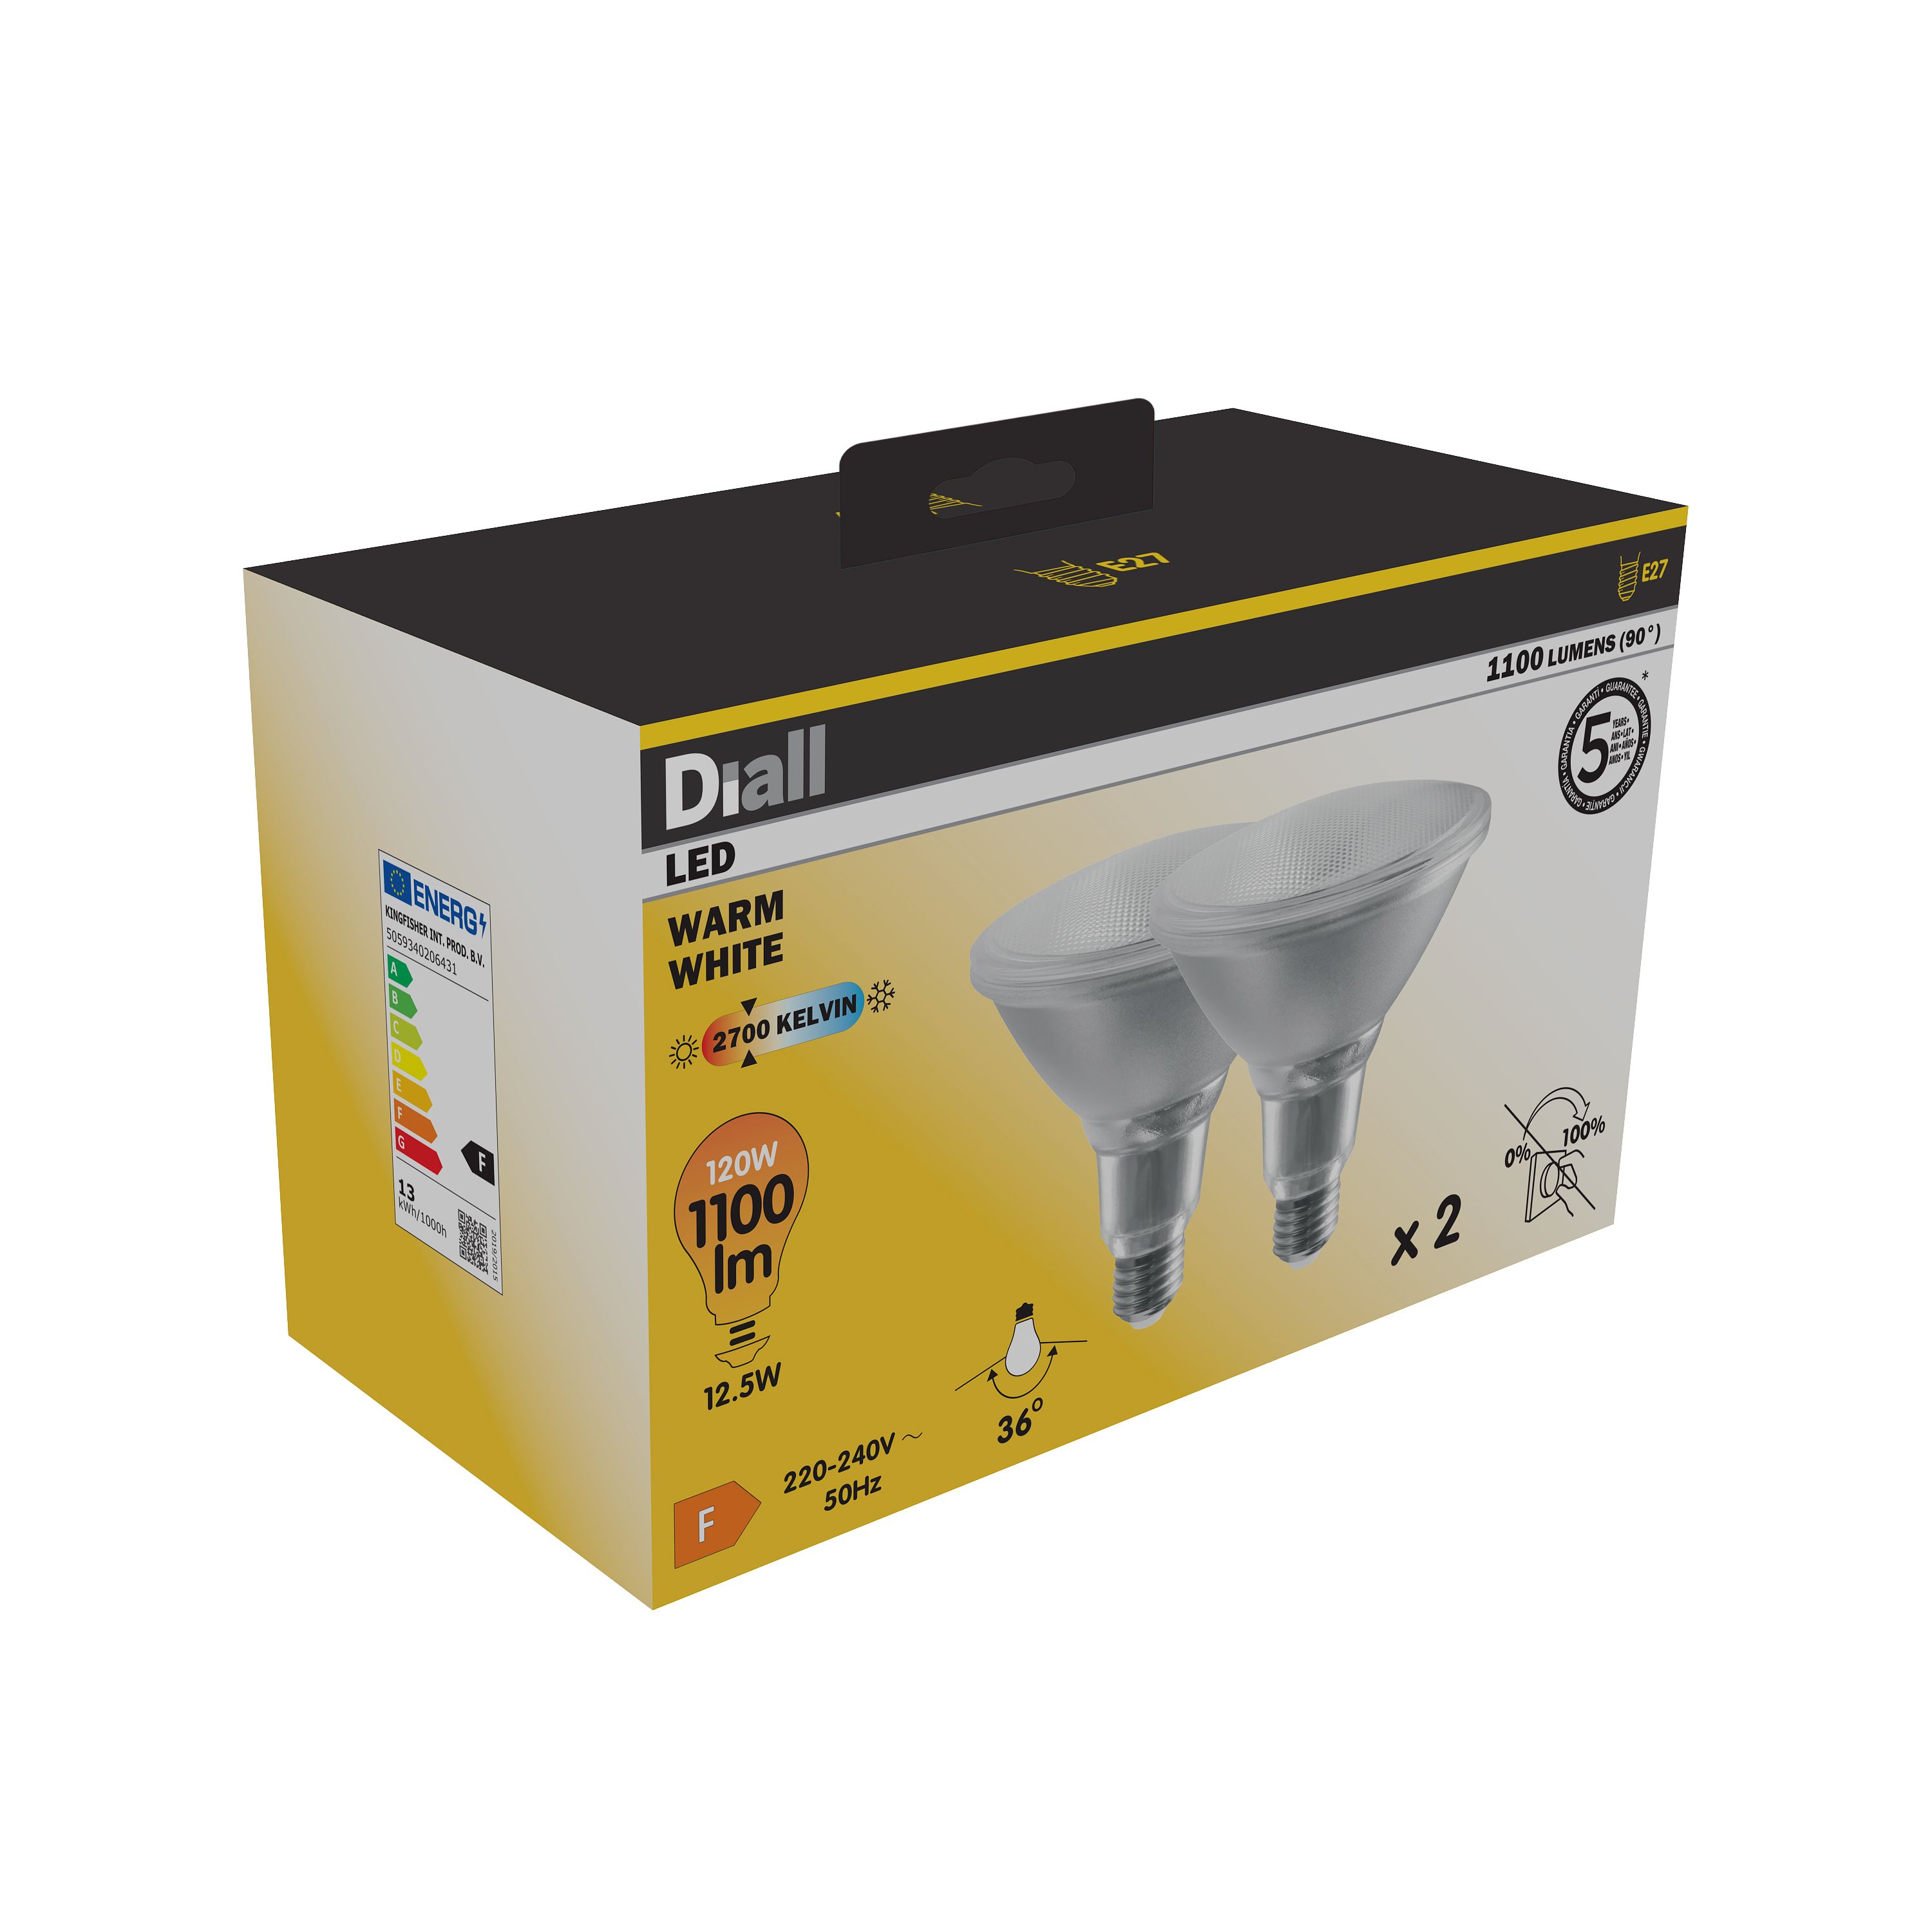 Diall SMD TYPE 12.5W 1100lm Milky Reflector (PAR38) Warm white LED Light bulb, Pack of 2